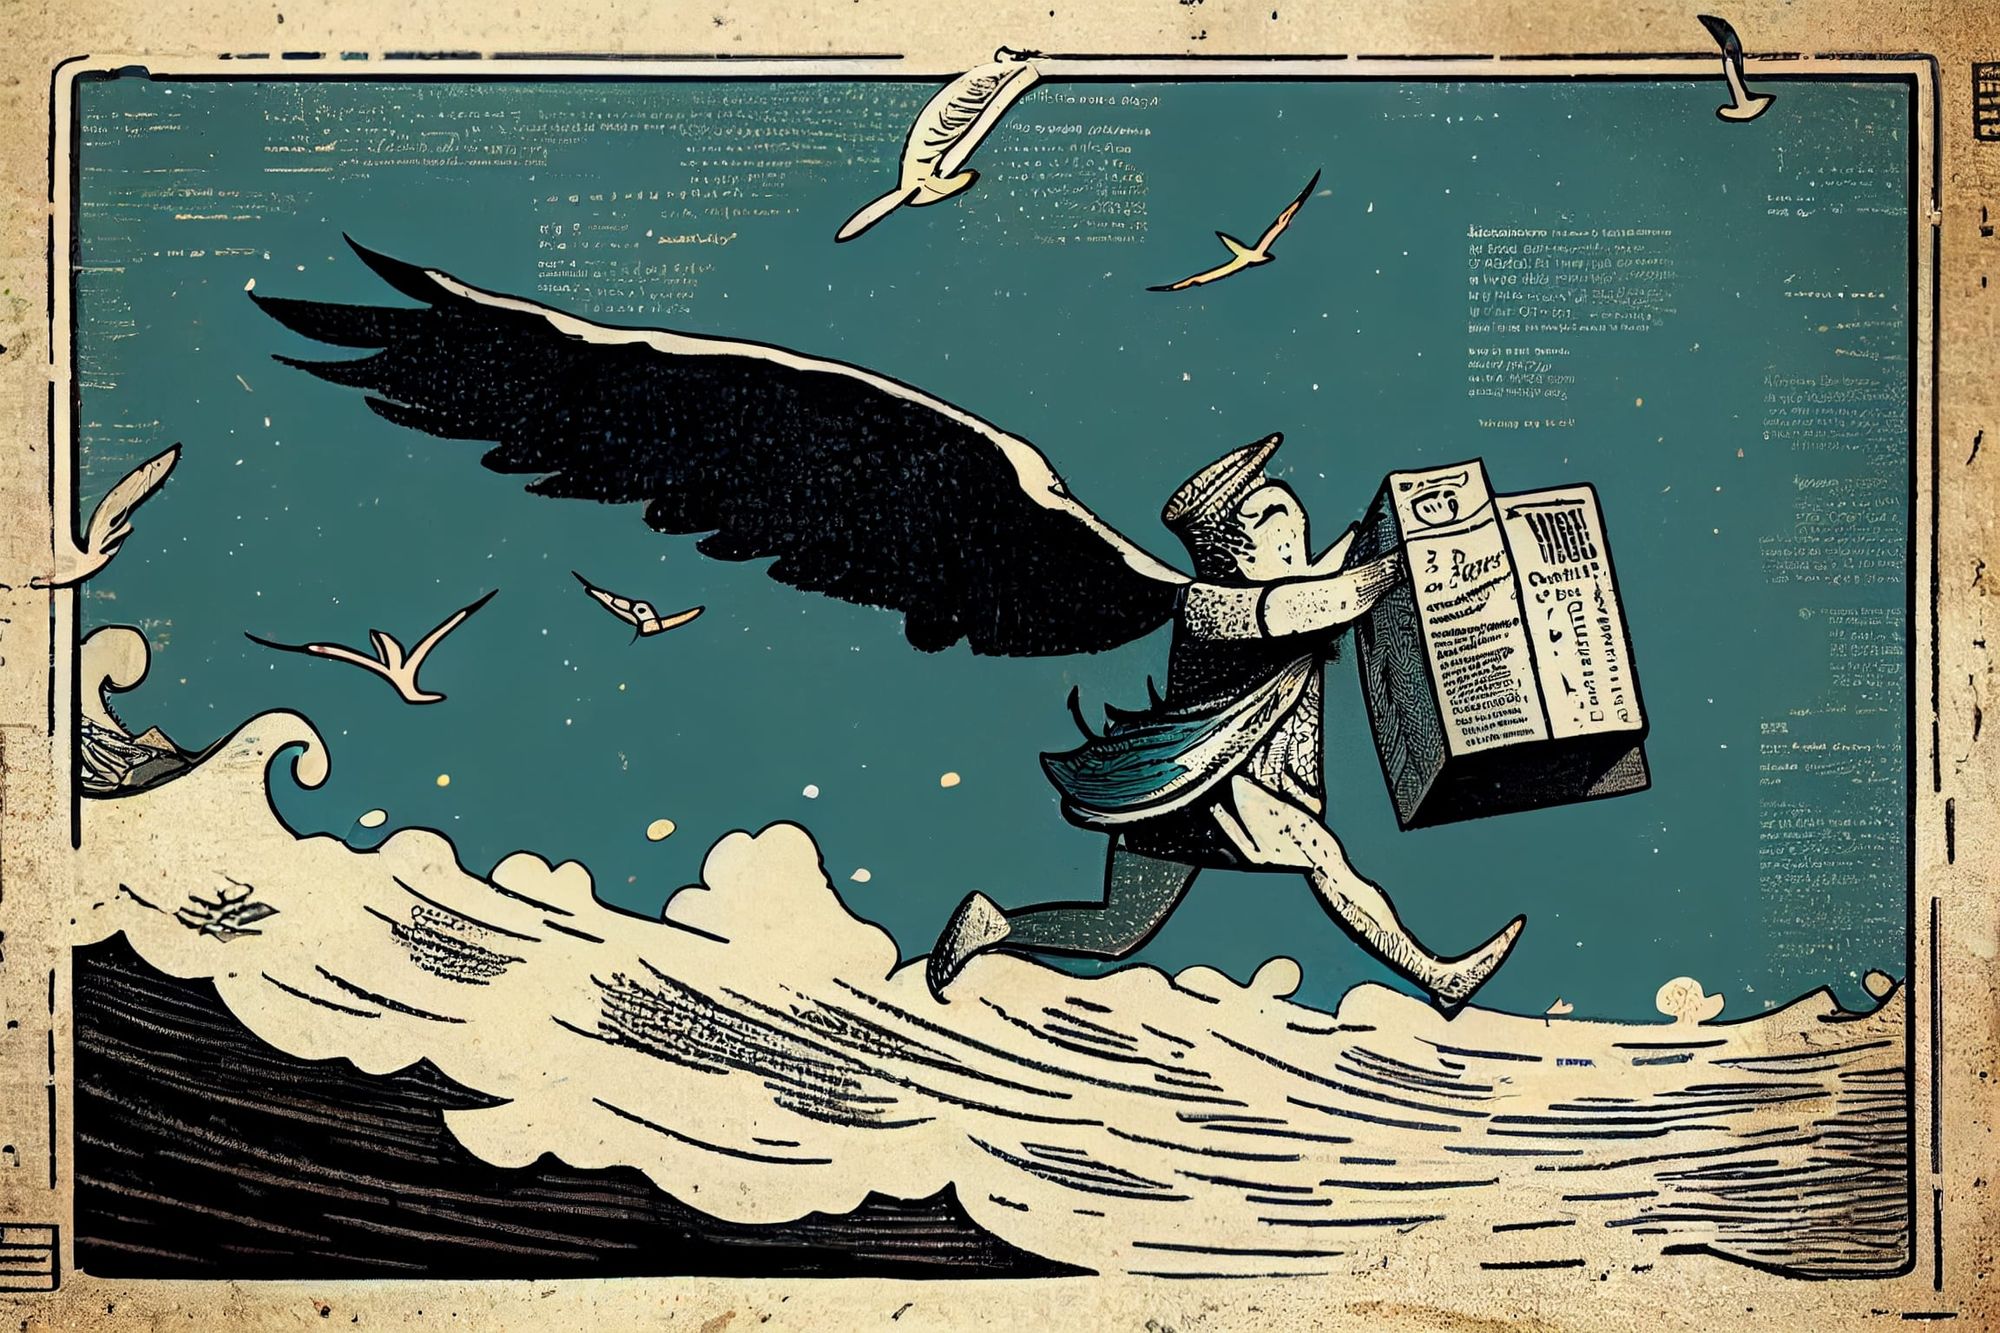 A winged figure carrying news across the ocean